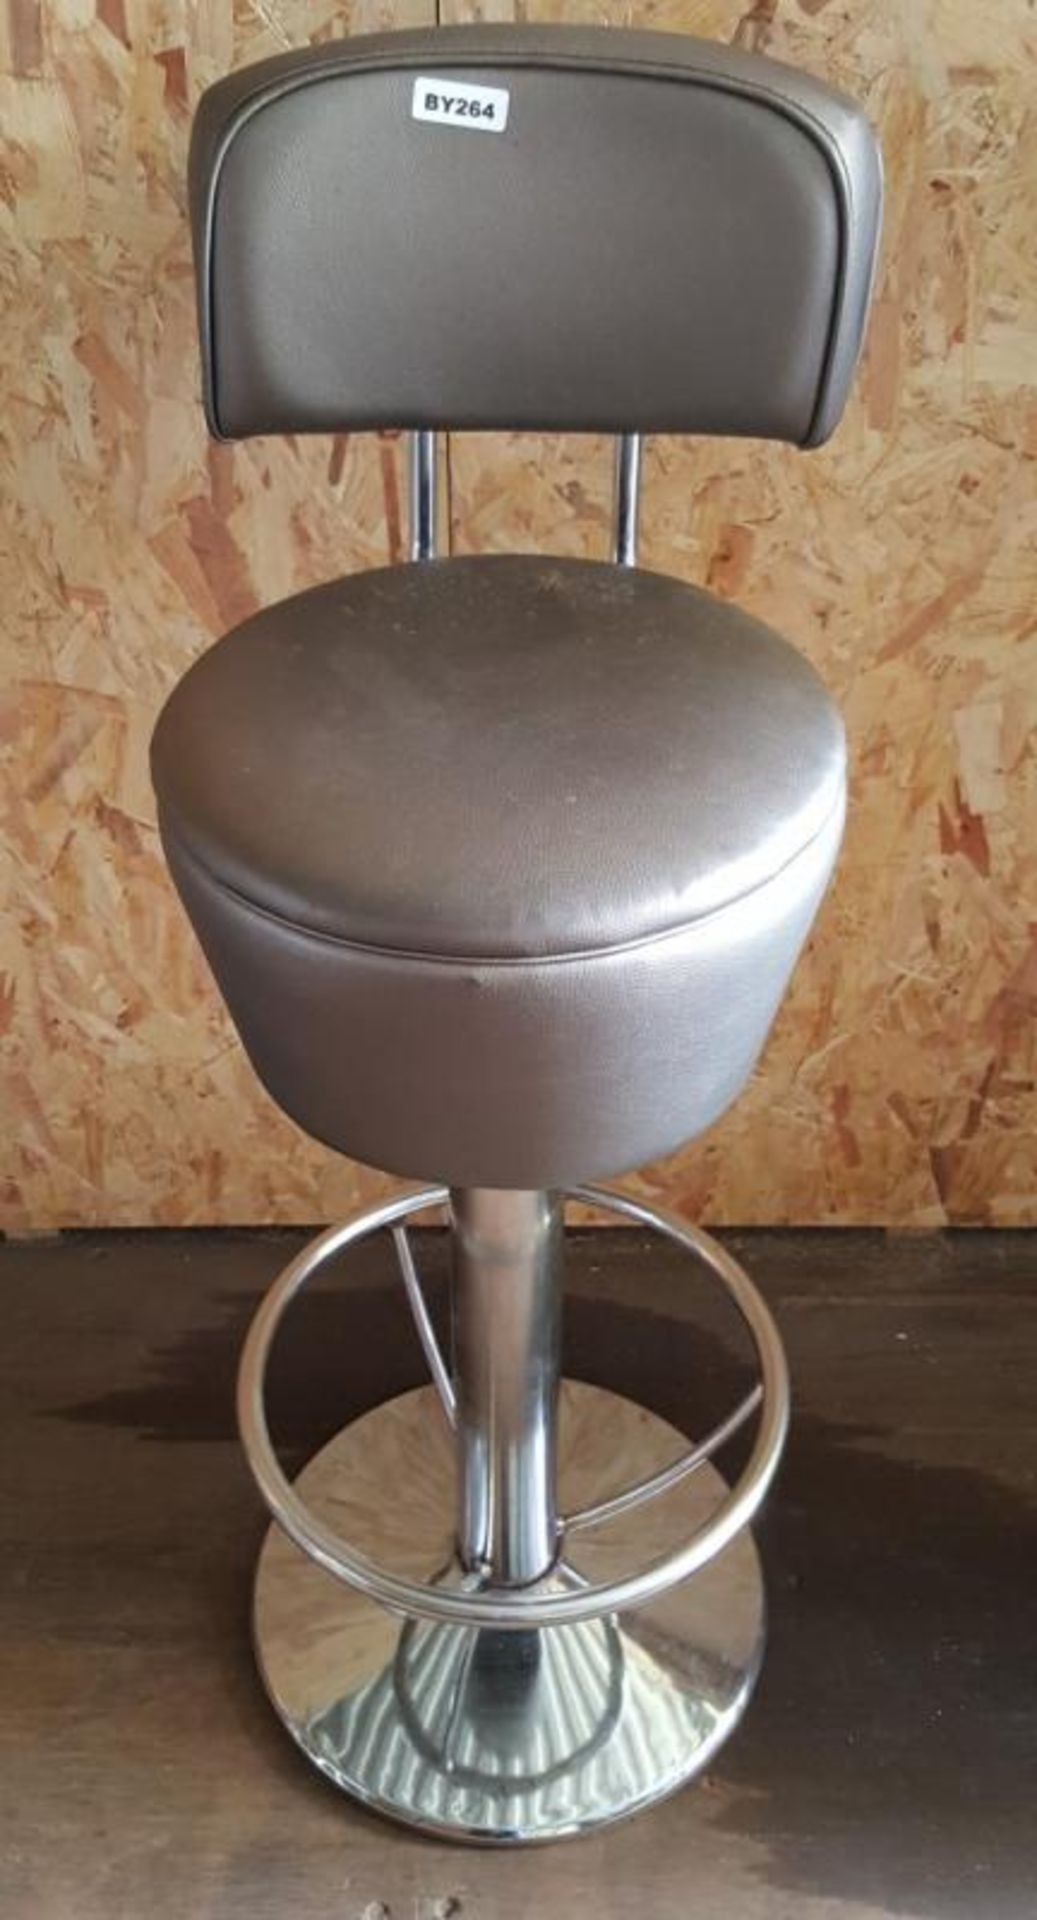 A Set Of 3 Bespoke Chrome Based Bar Stools With Dark Sliver Faux Leather Seat &amp; Back - Ref BY264